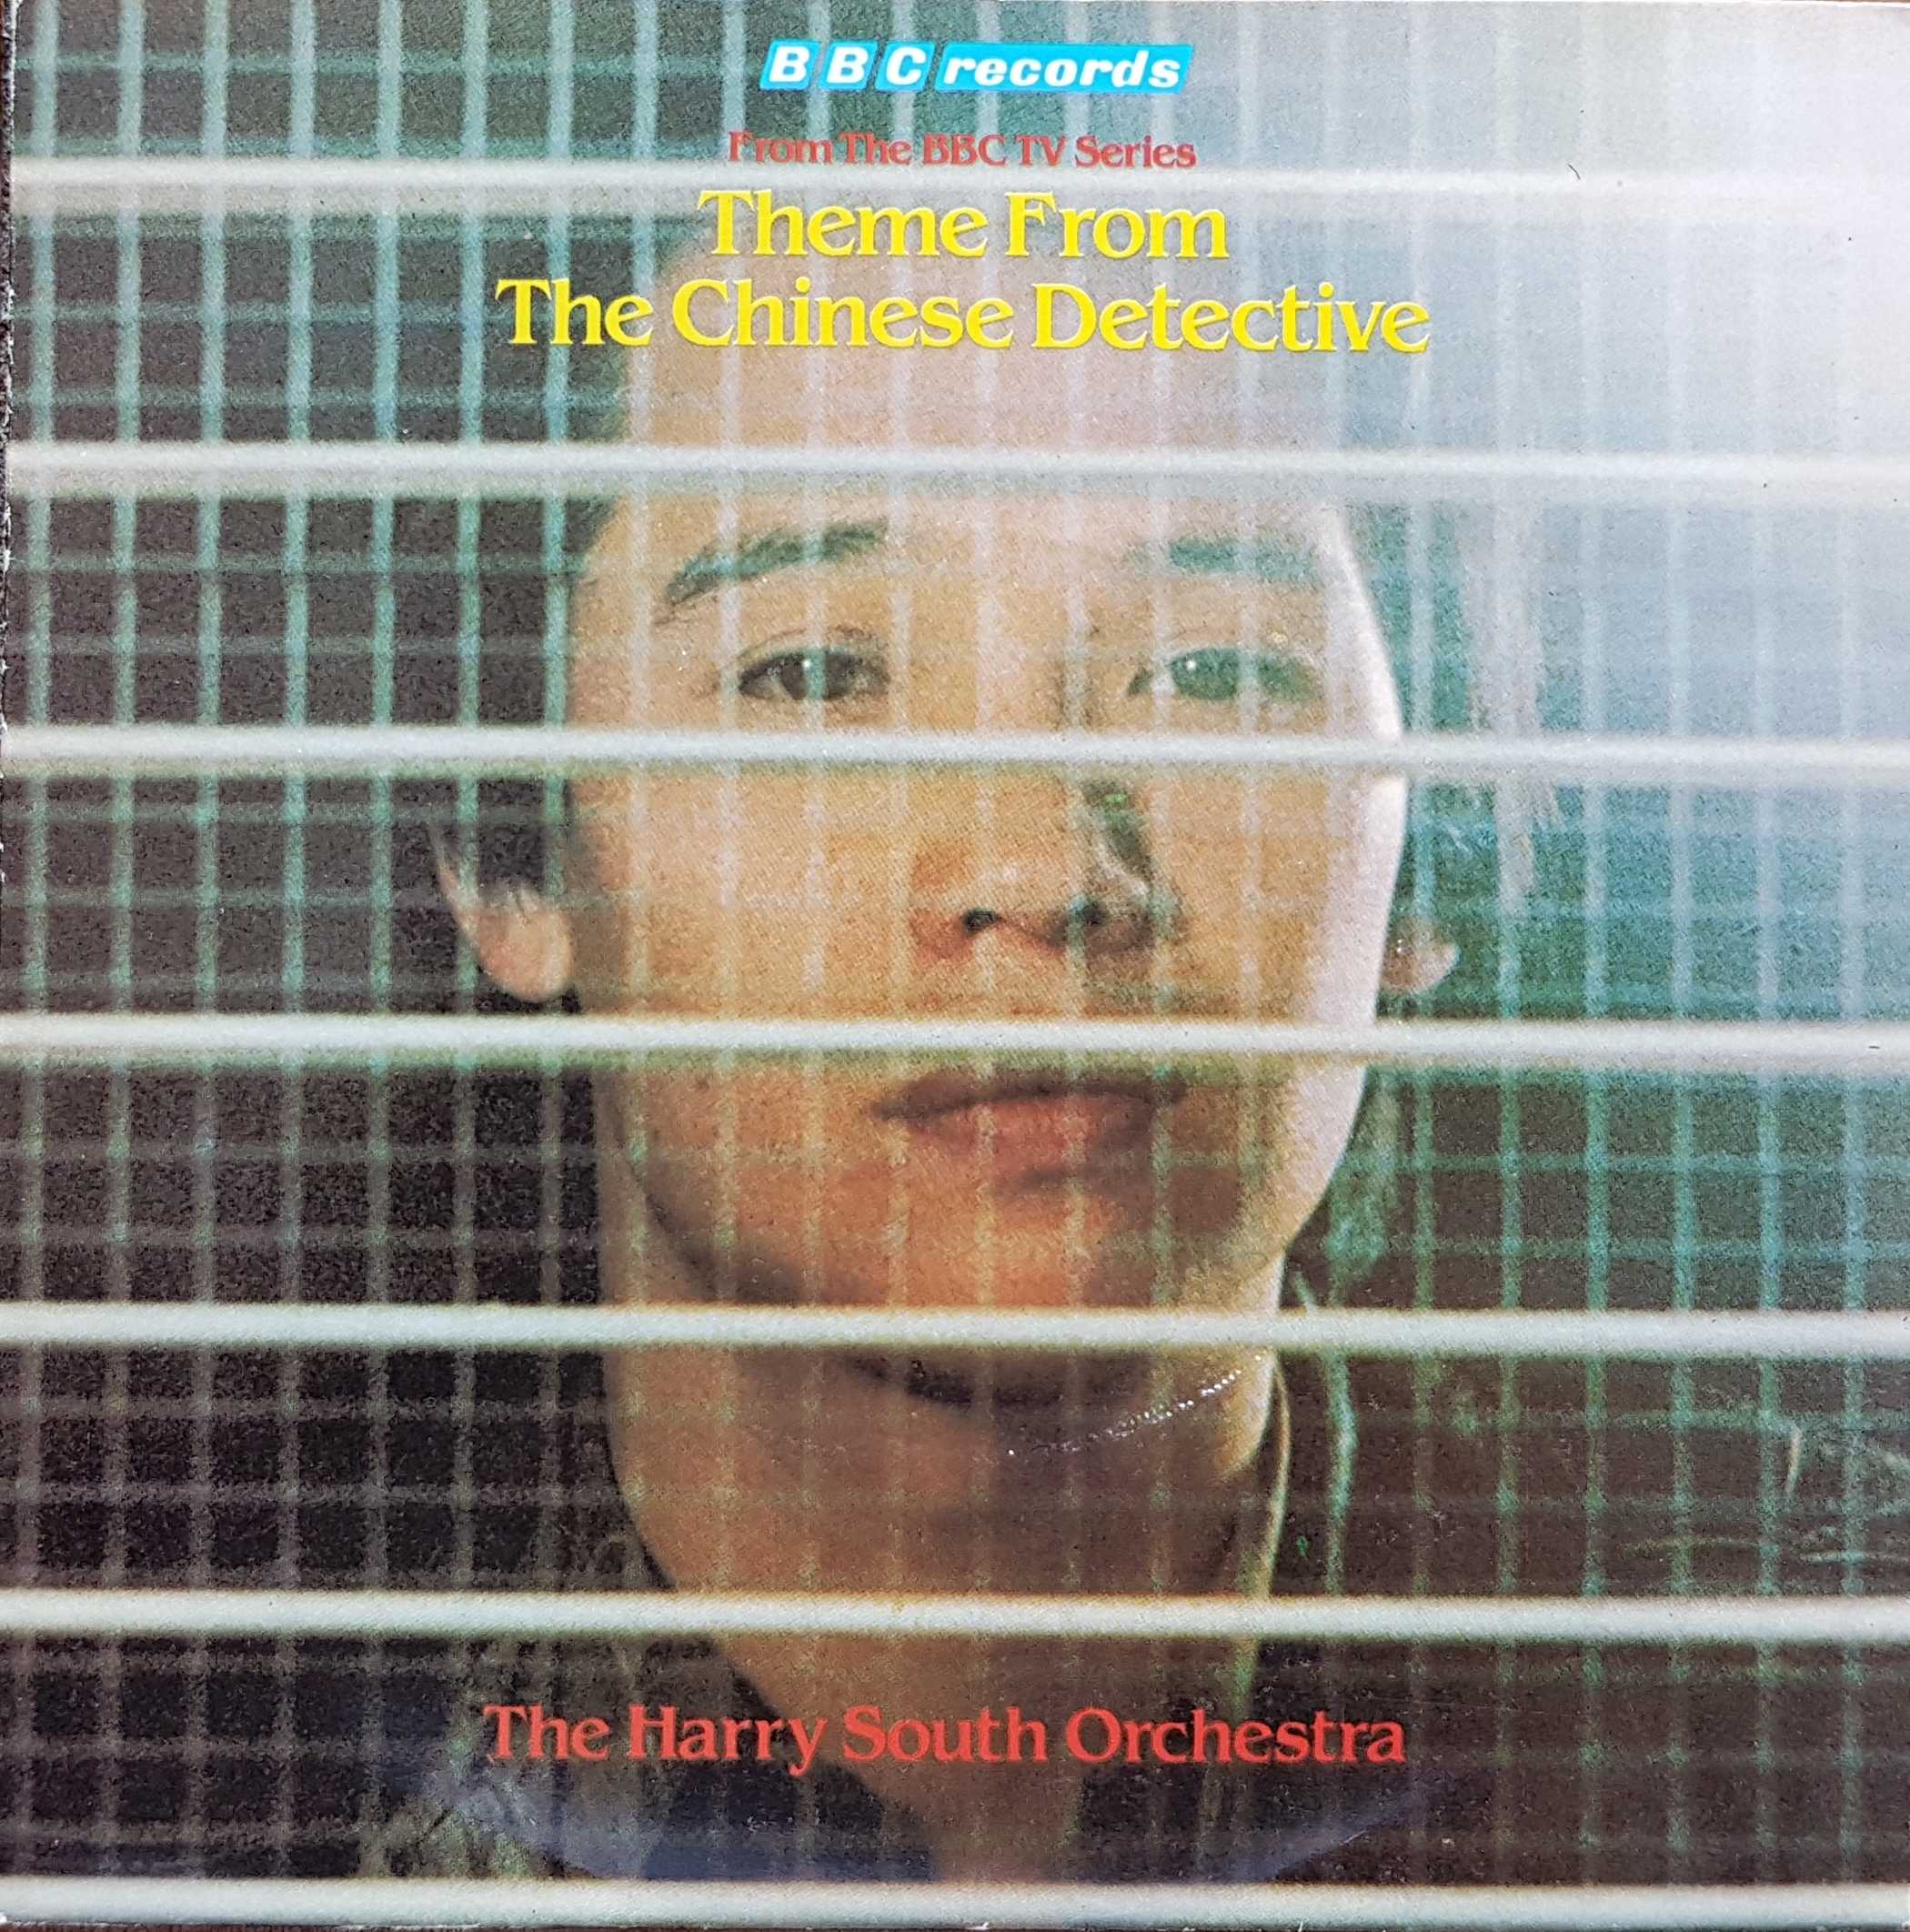 Picture of RESL 91 The Chinese detective by artist Harry South from the BBC singles - Records and Tapes library